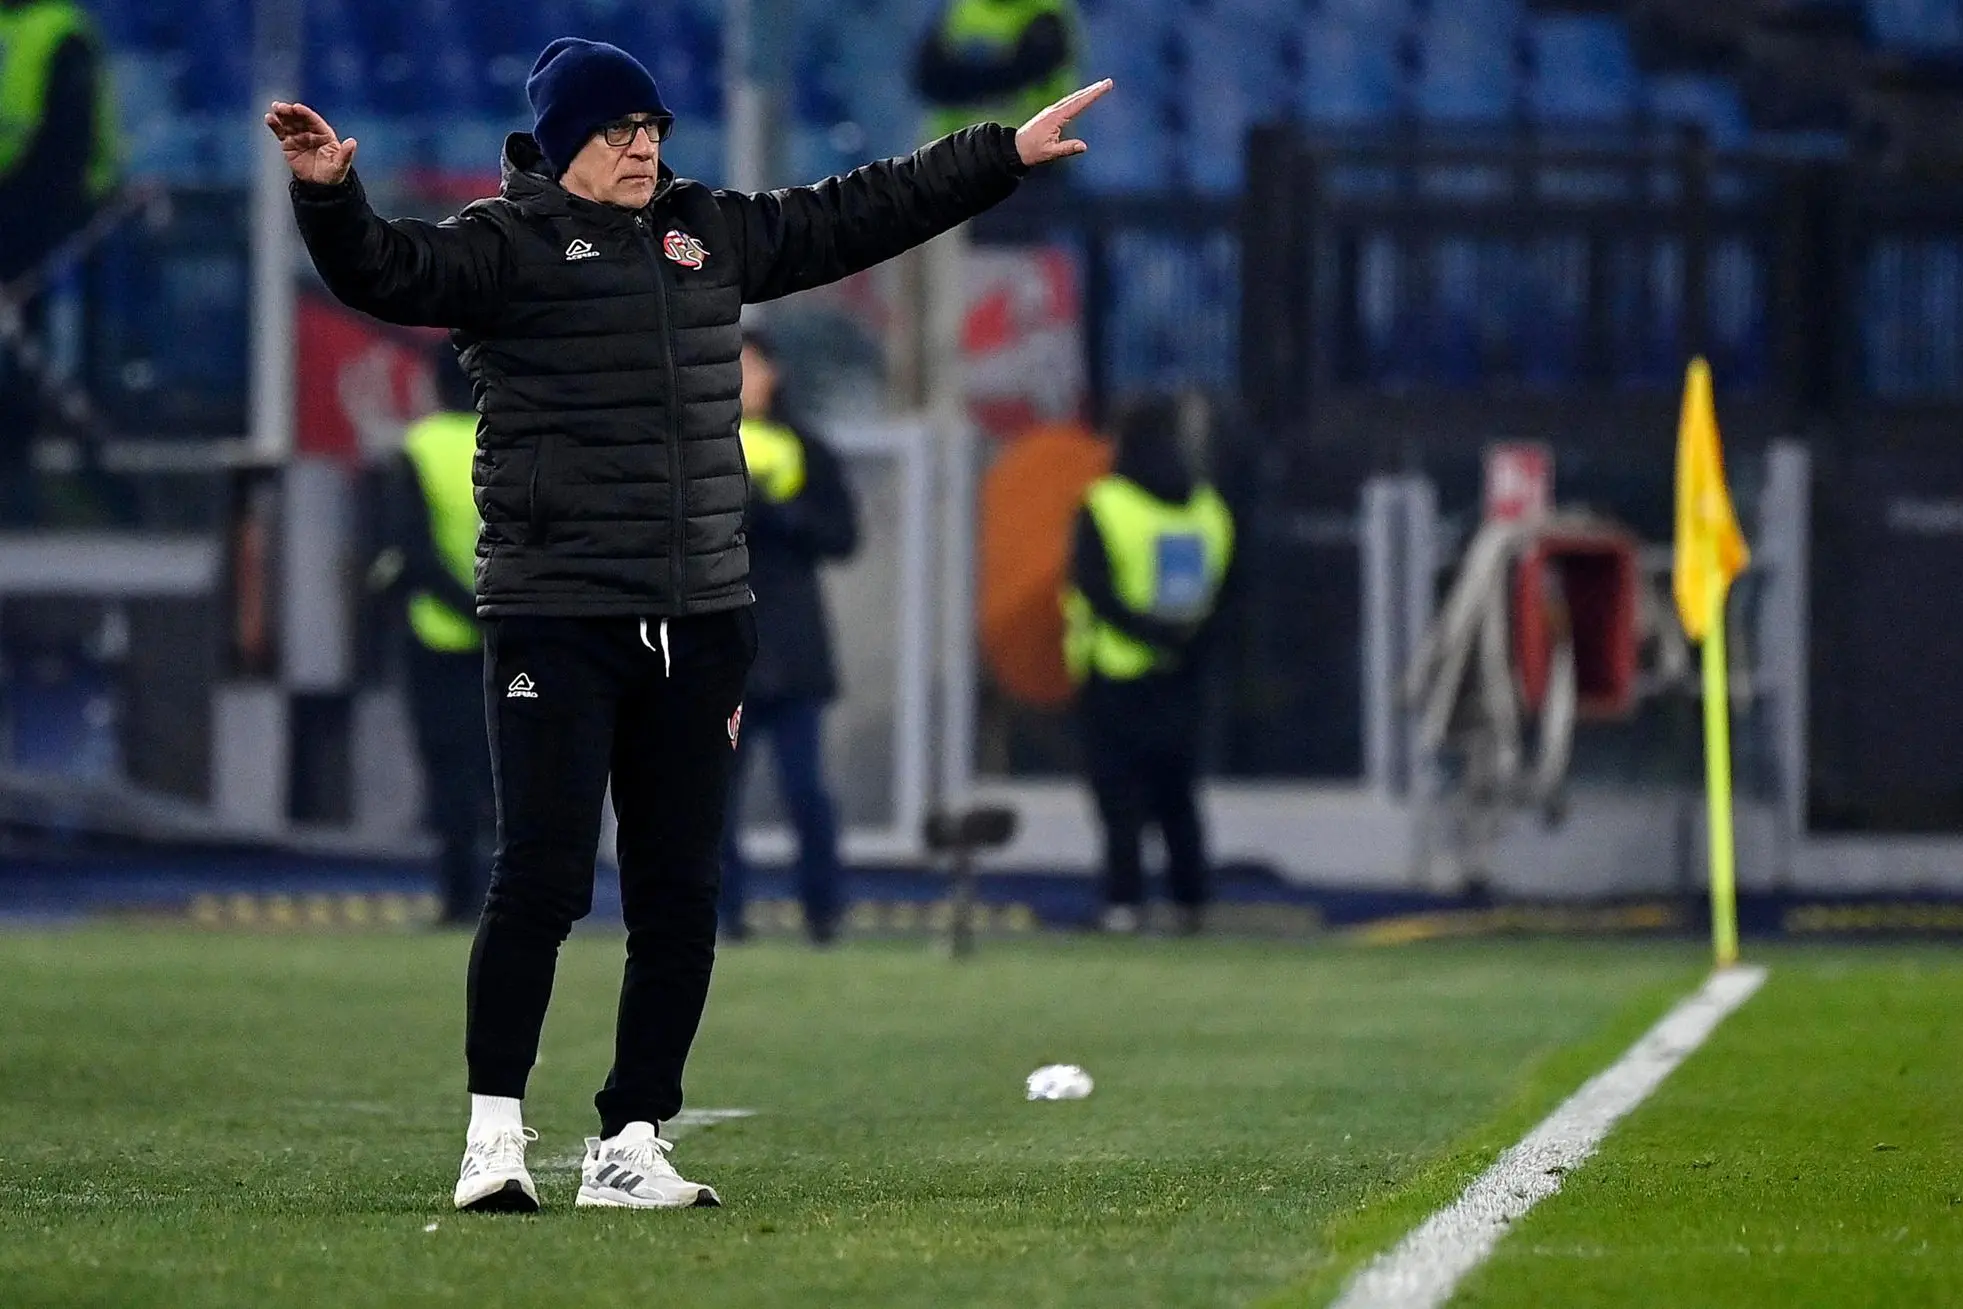 Cremonese's head coach Davide Ballardini reacts during the Coppa Italia soccer match between AS Roma and US Cremonese at the Olimpico stadium in Rome, Italy, 1 February 2023. ANSA/RICCARDO ANTIMIANI